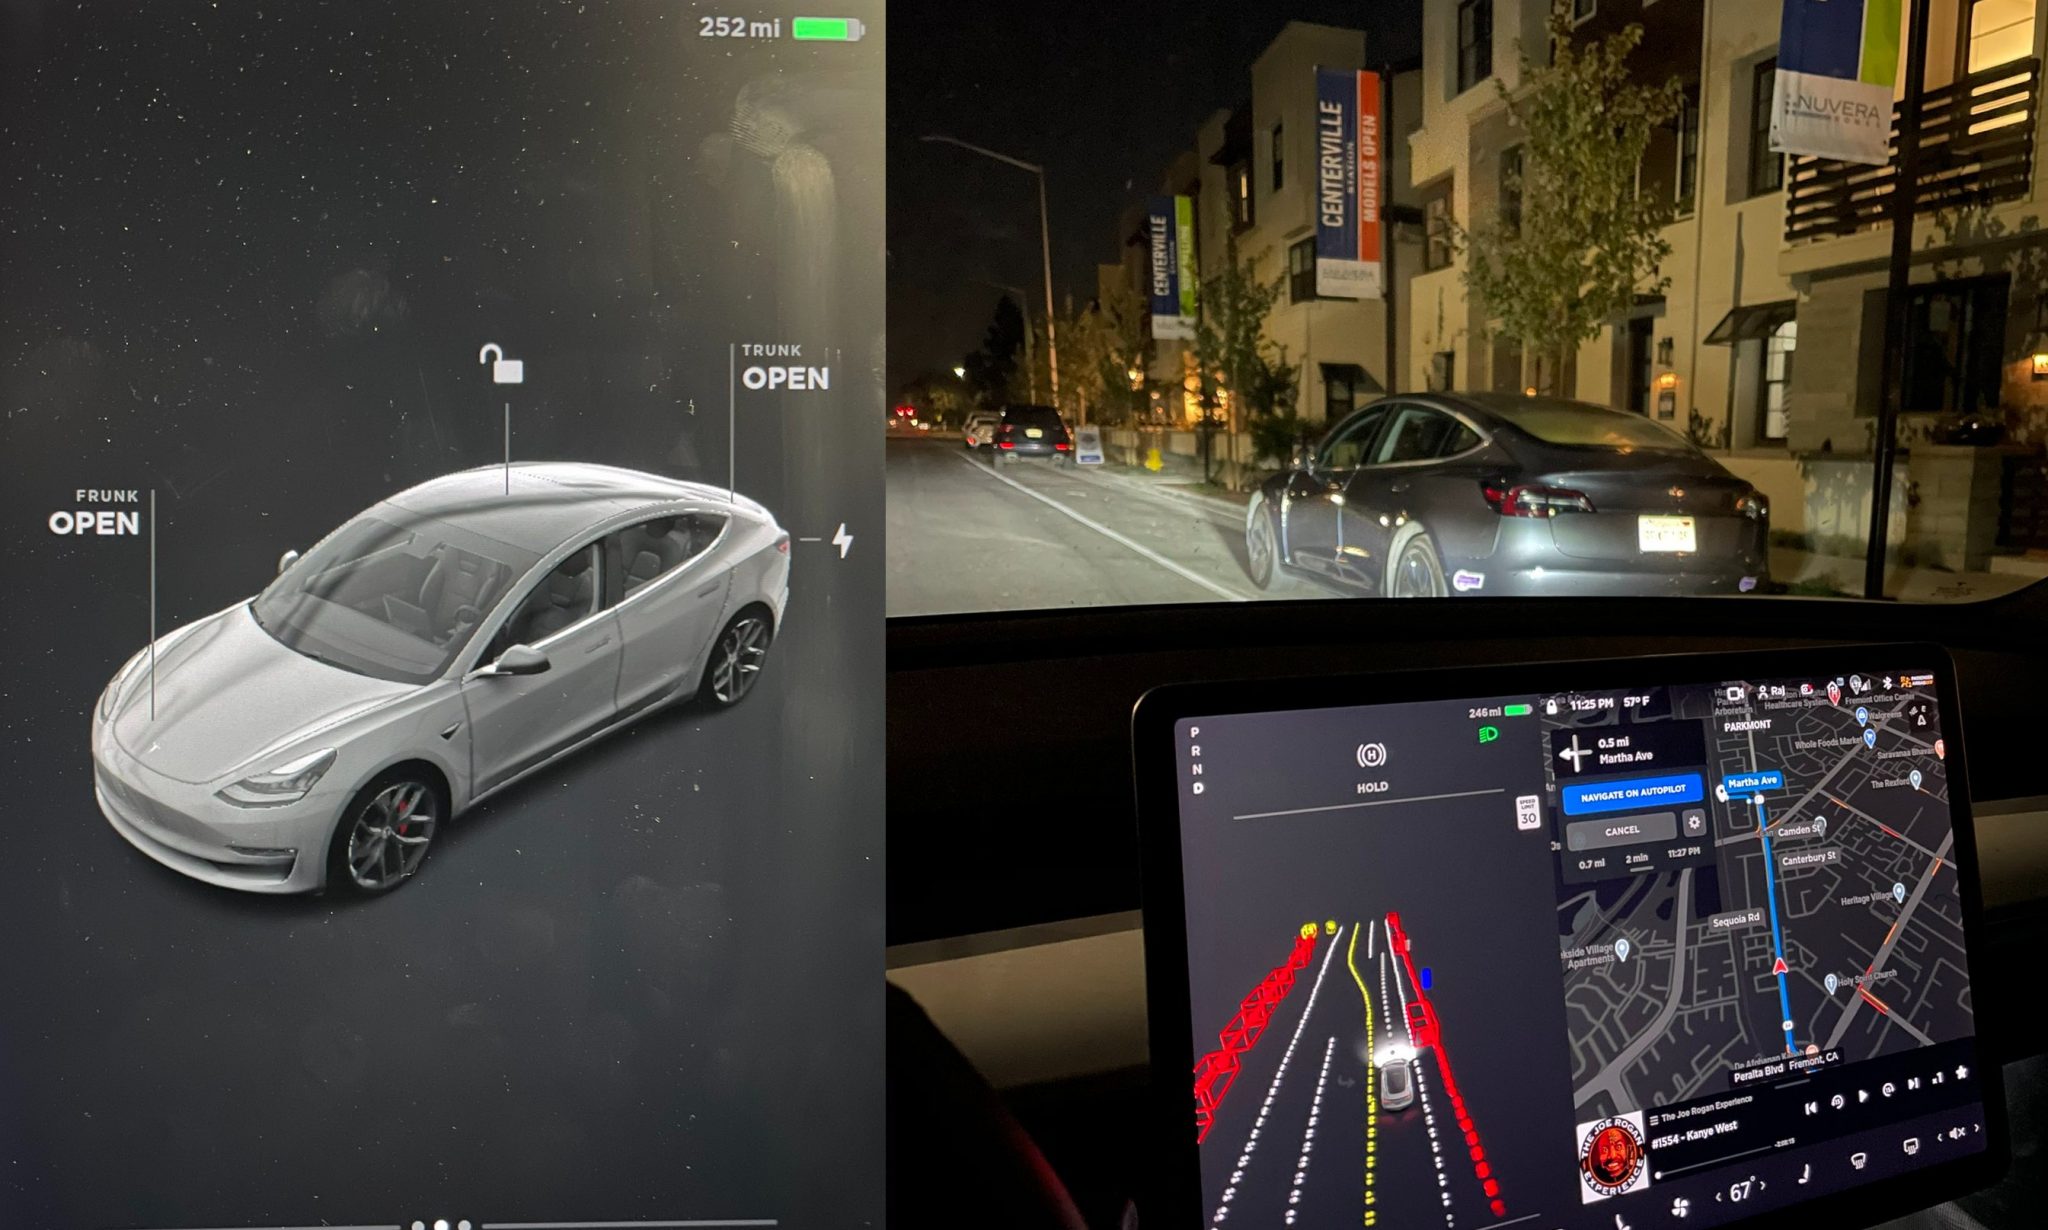 Kommt bald der coole truck für die steckdose? First look at Tesla's new UI and driving visualizations for FSD beta in